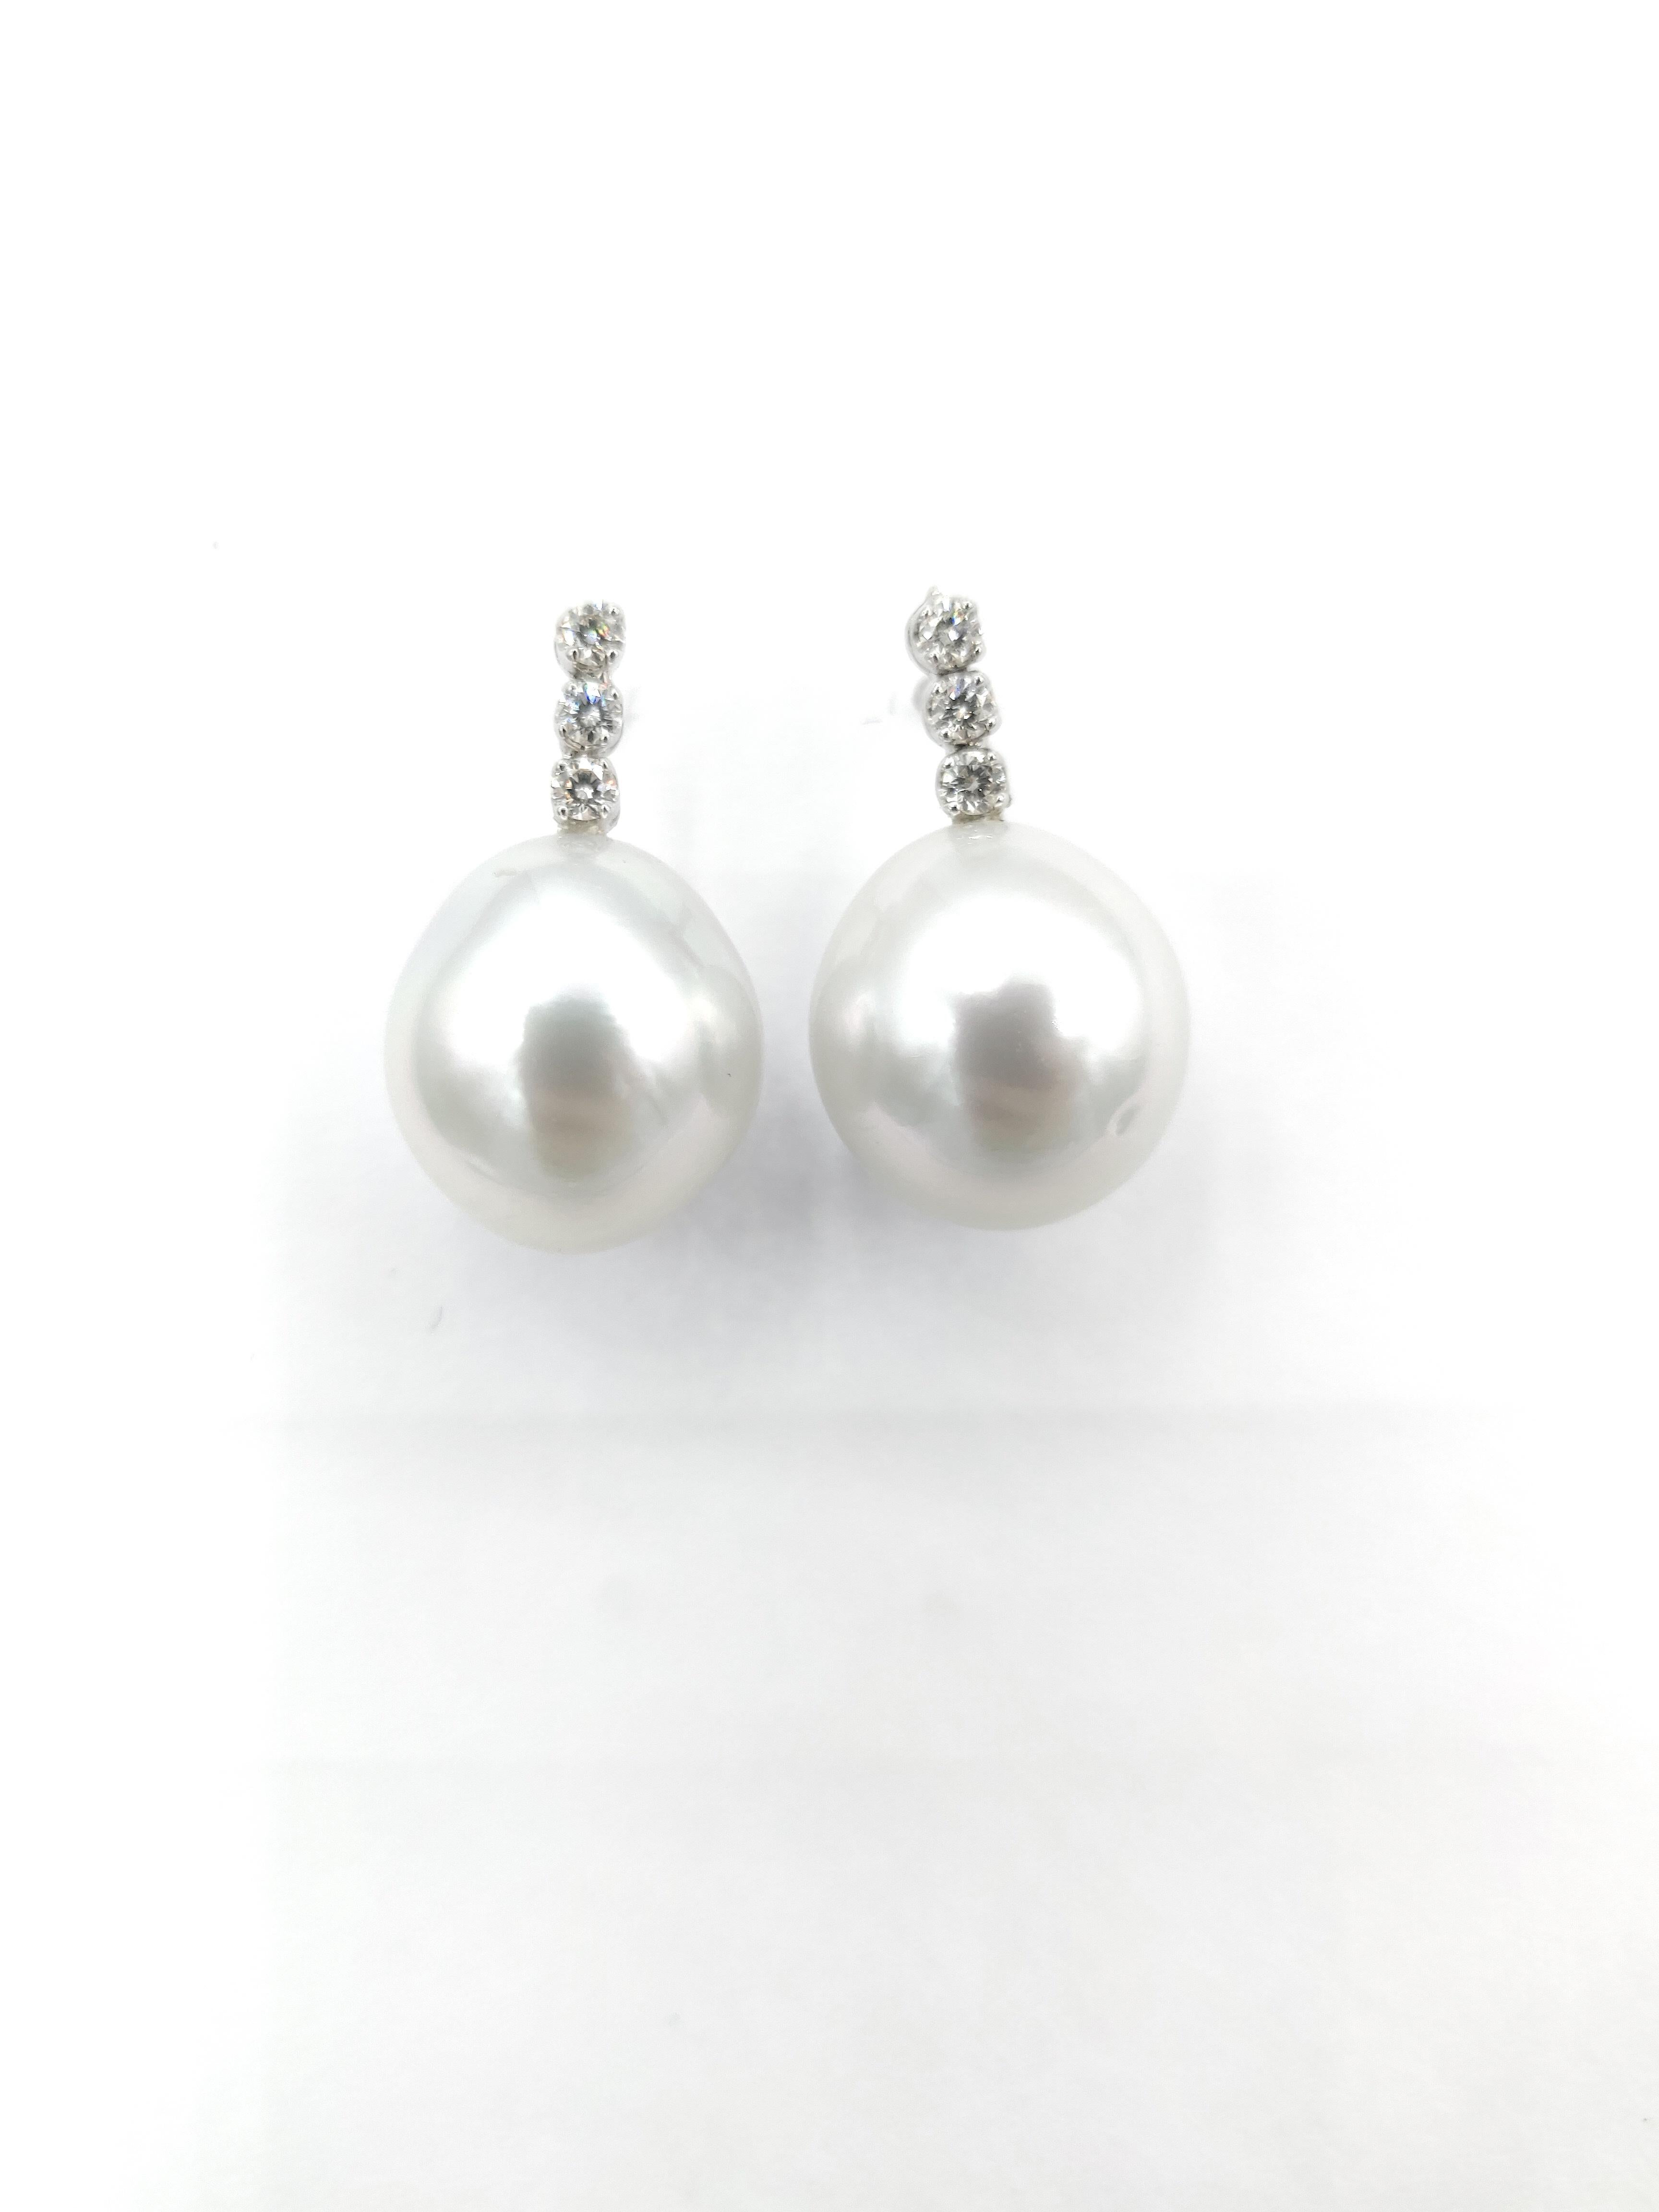 BOON Three Diamond and Hanging White South Sea Pearl Drop Earrings in 18K White Gold

Diamond: 0.22ct.
Pearl: White South Sea Pearl 2pcs.
Gold: 2.48g.